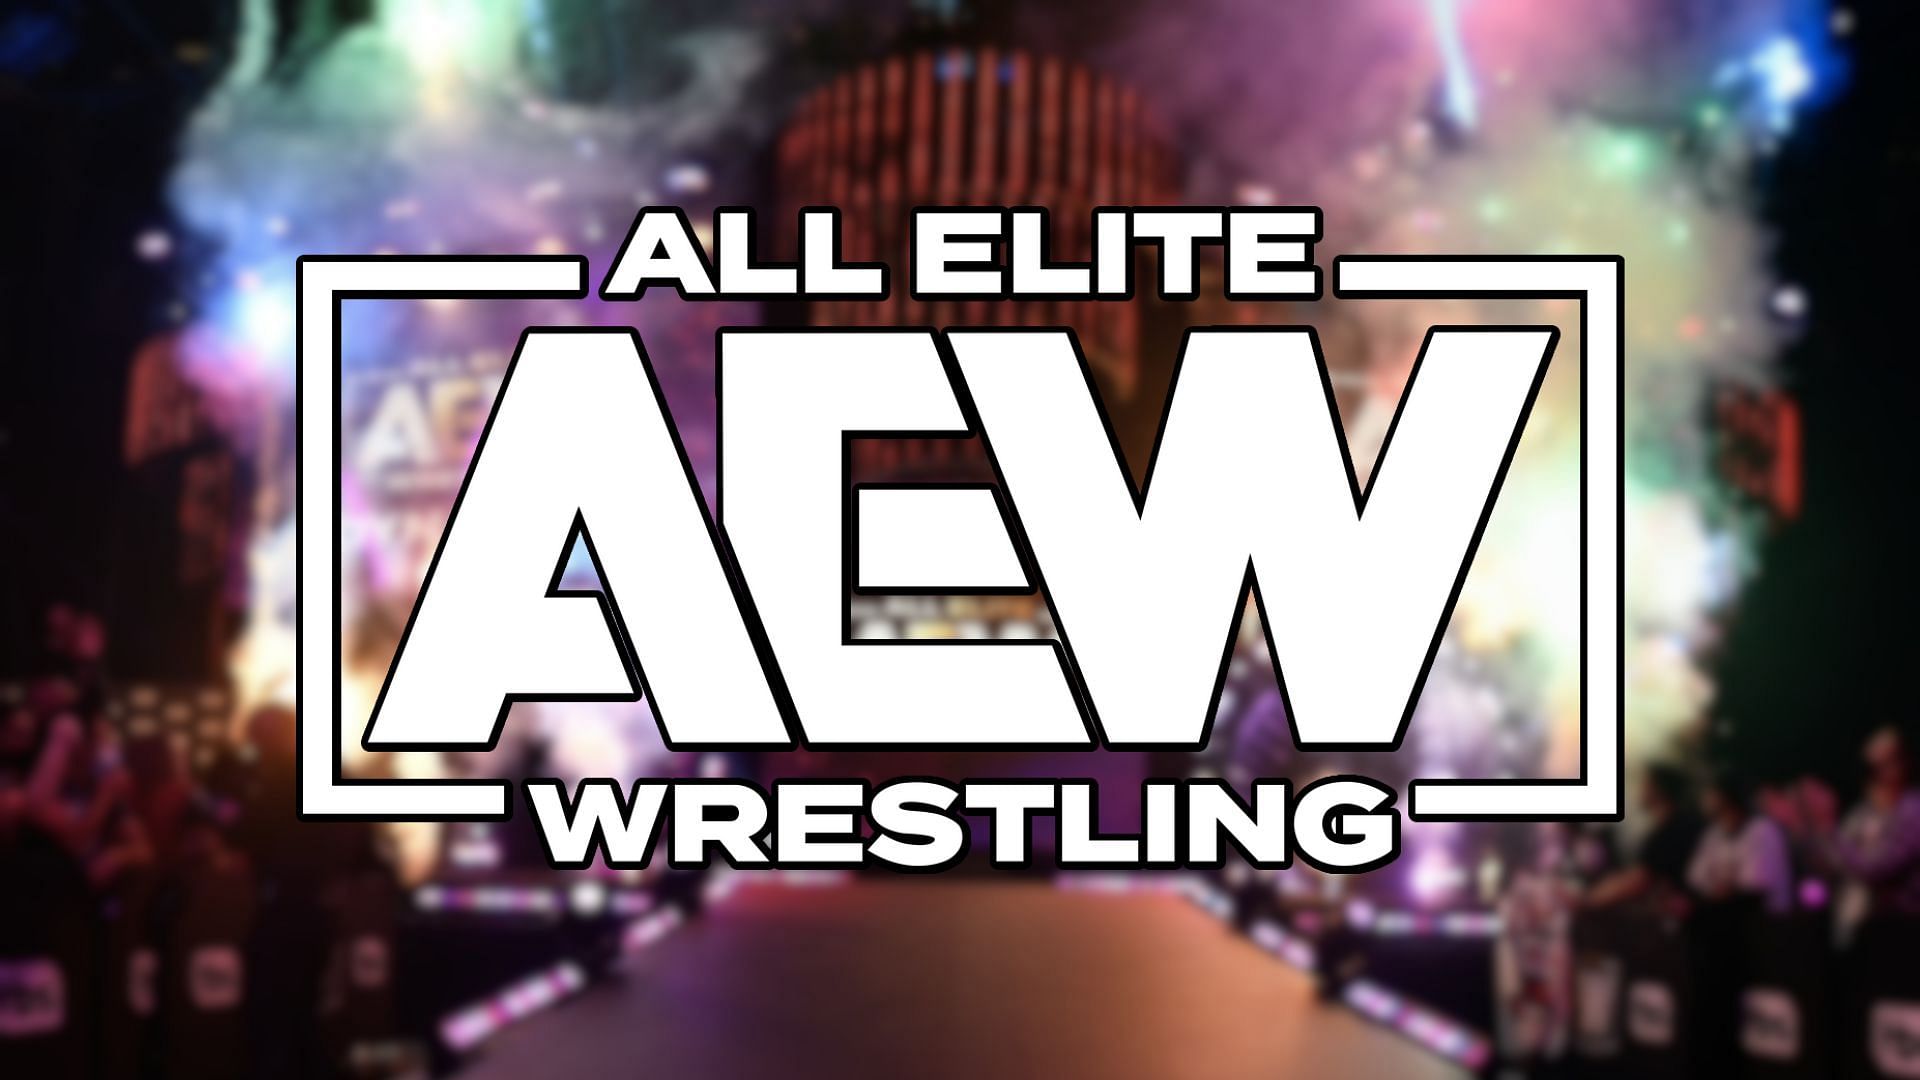 Current champion has reportedly signed a new five-year contract with AEW